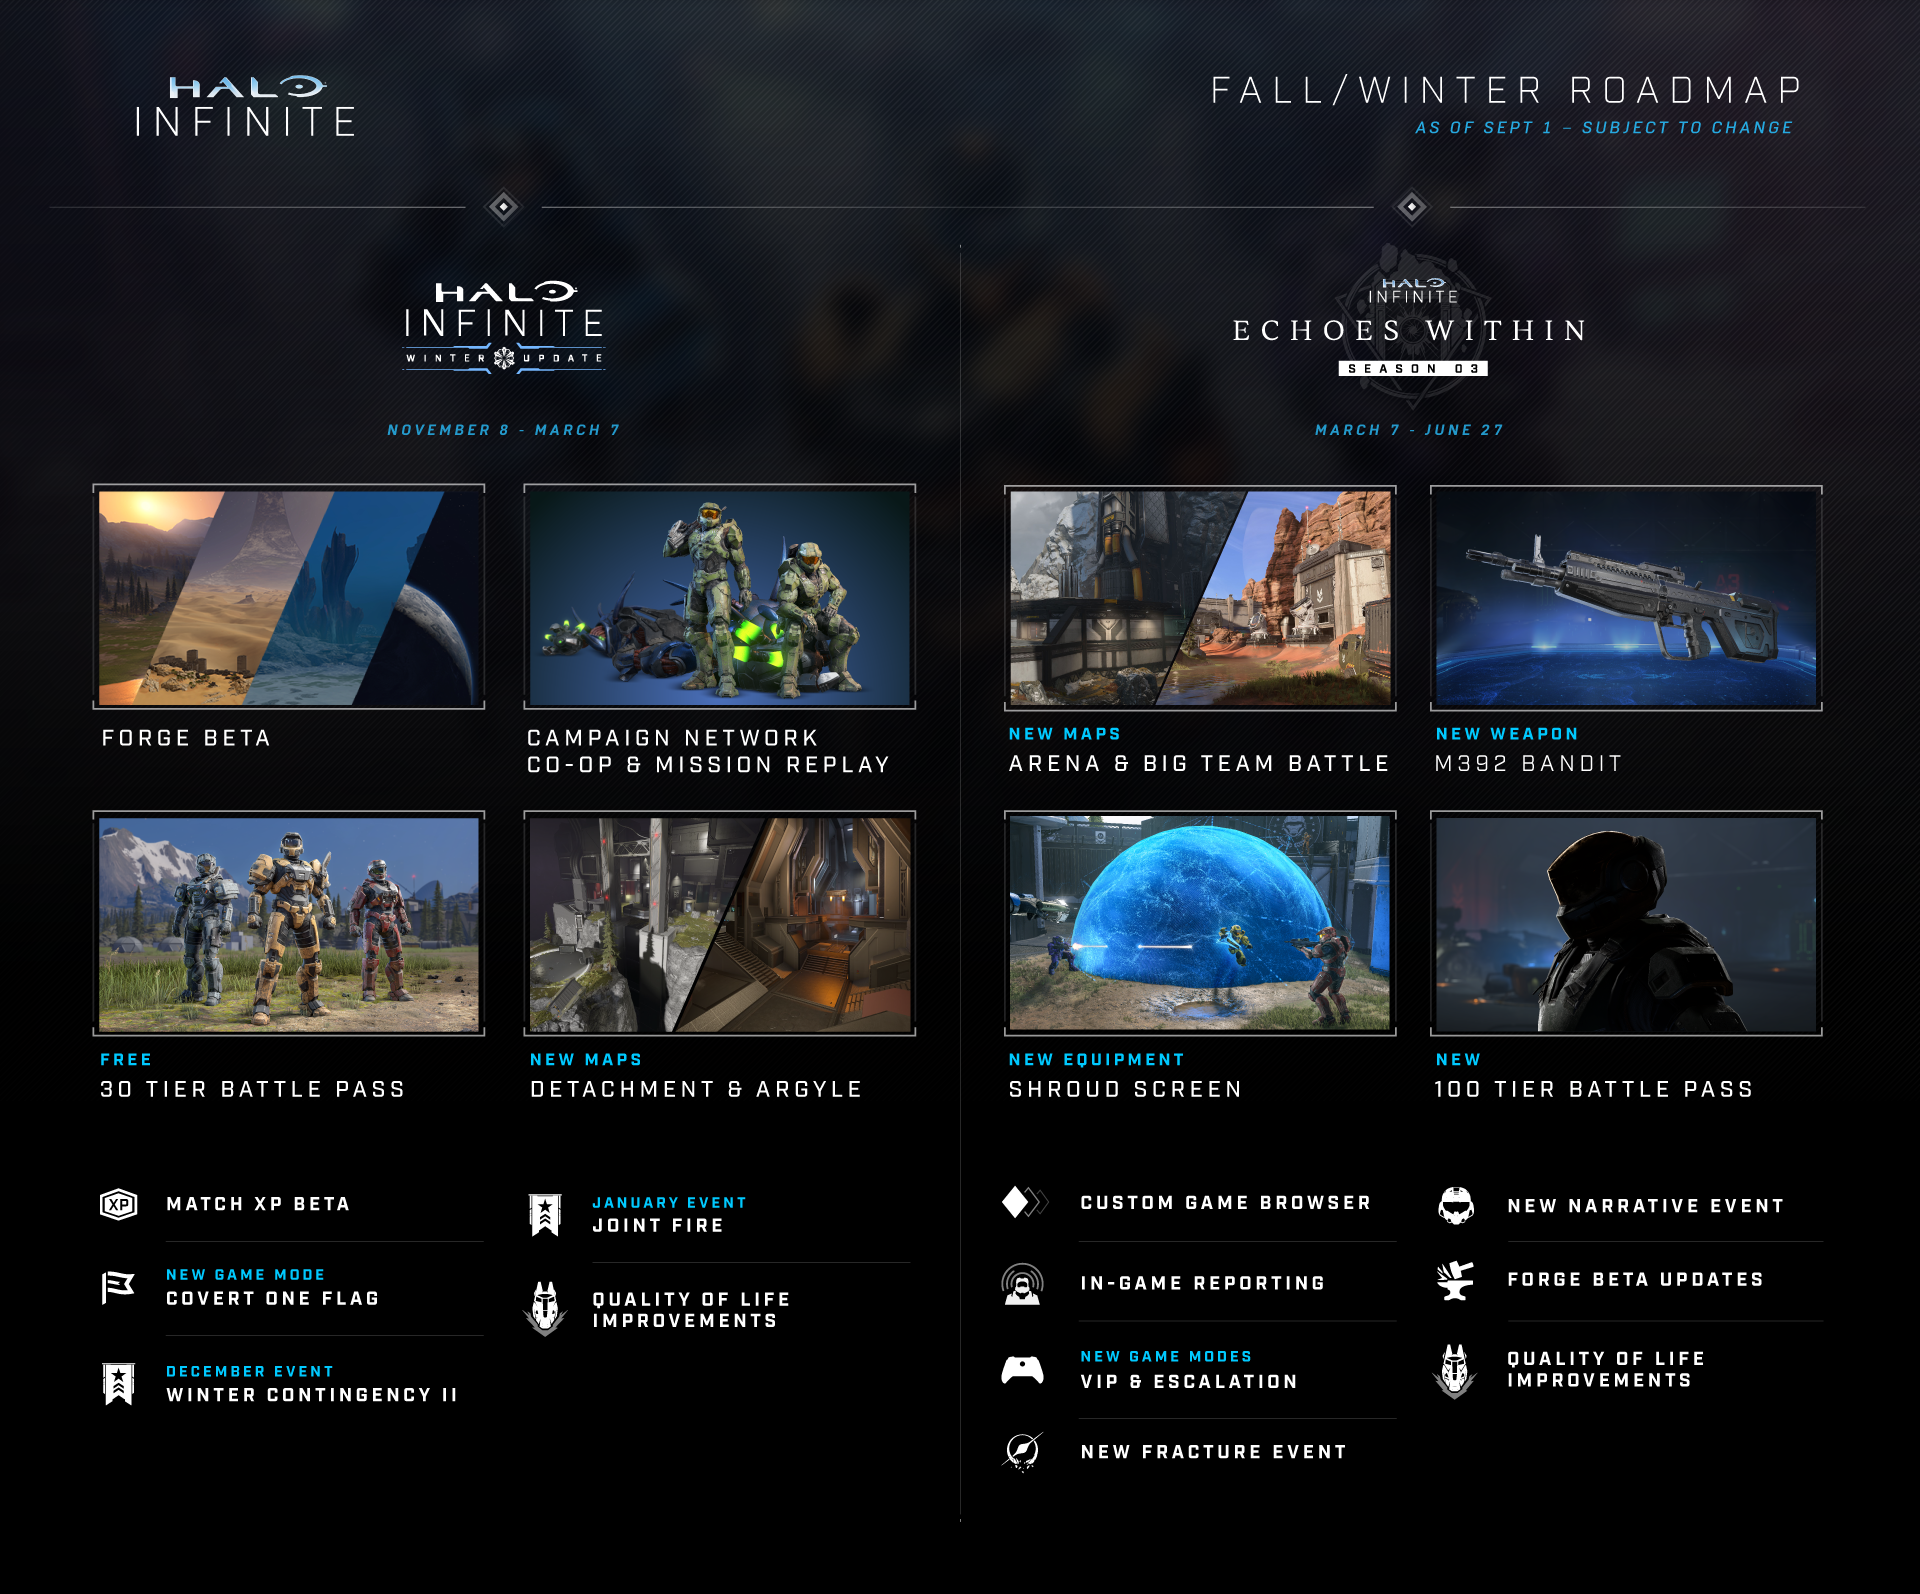 Halo Infinite (Campaign) Is Now Available For Digital Pre-order